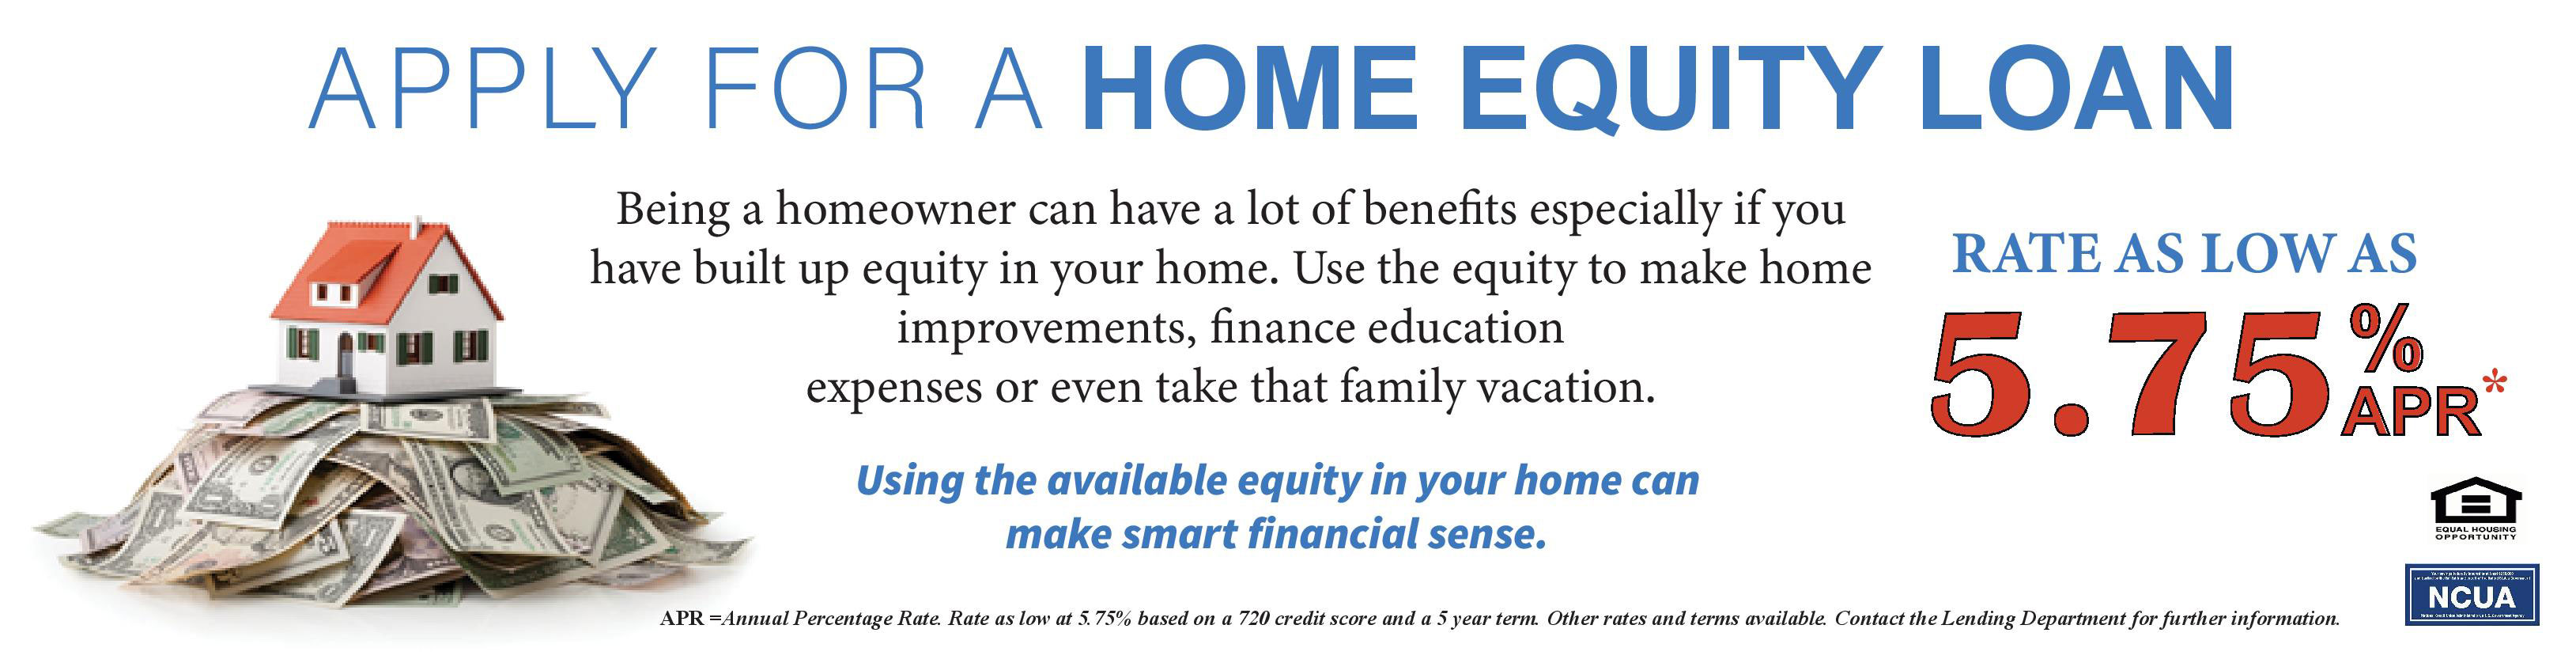 Apply for a home equity loan. Rates as low as 4.25% apr